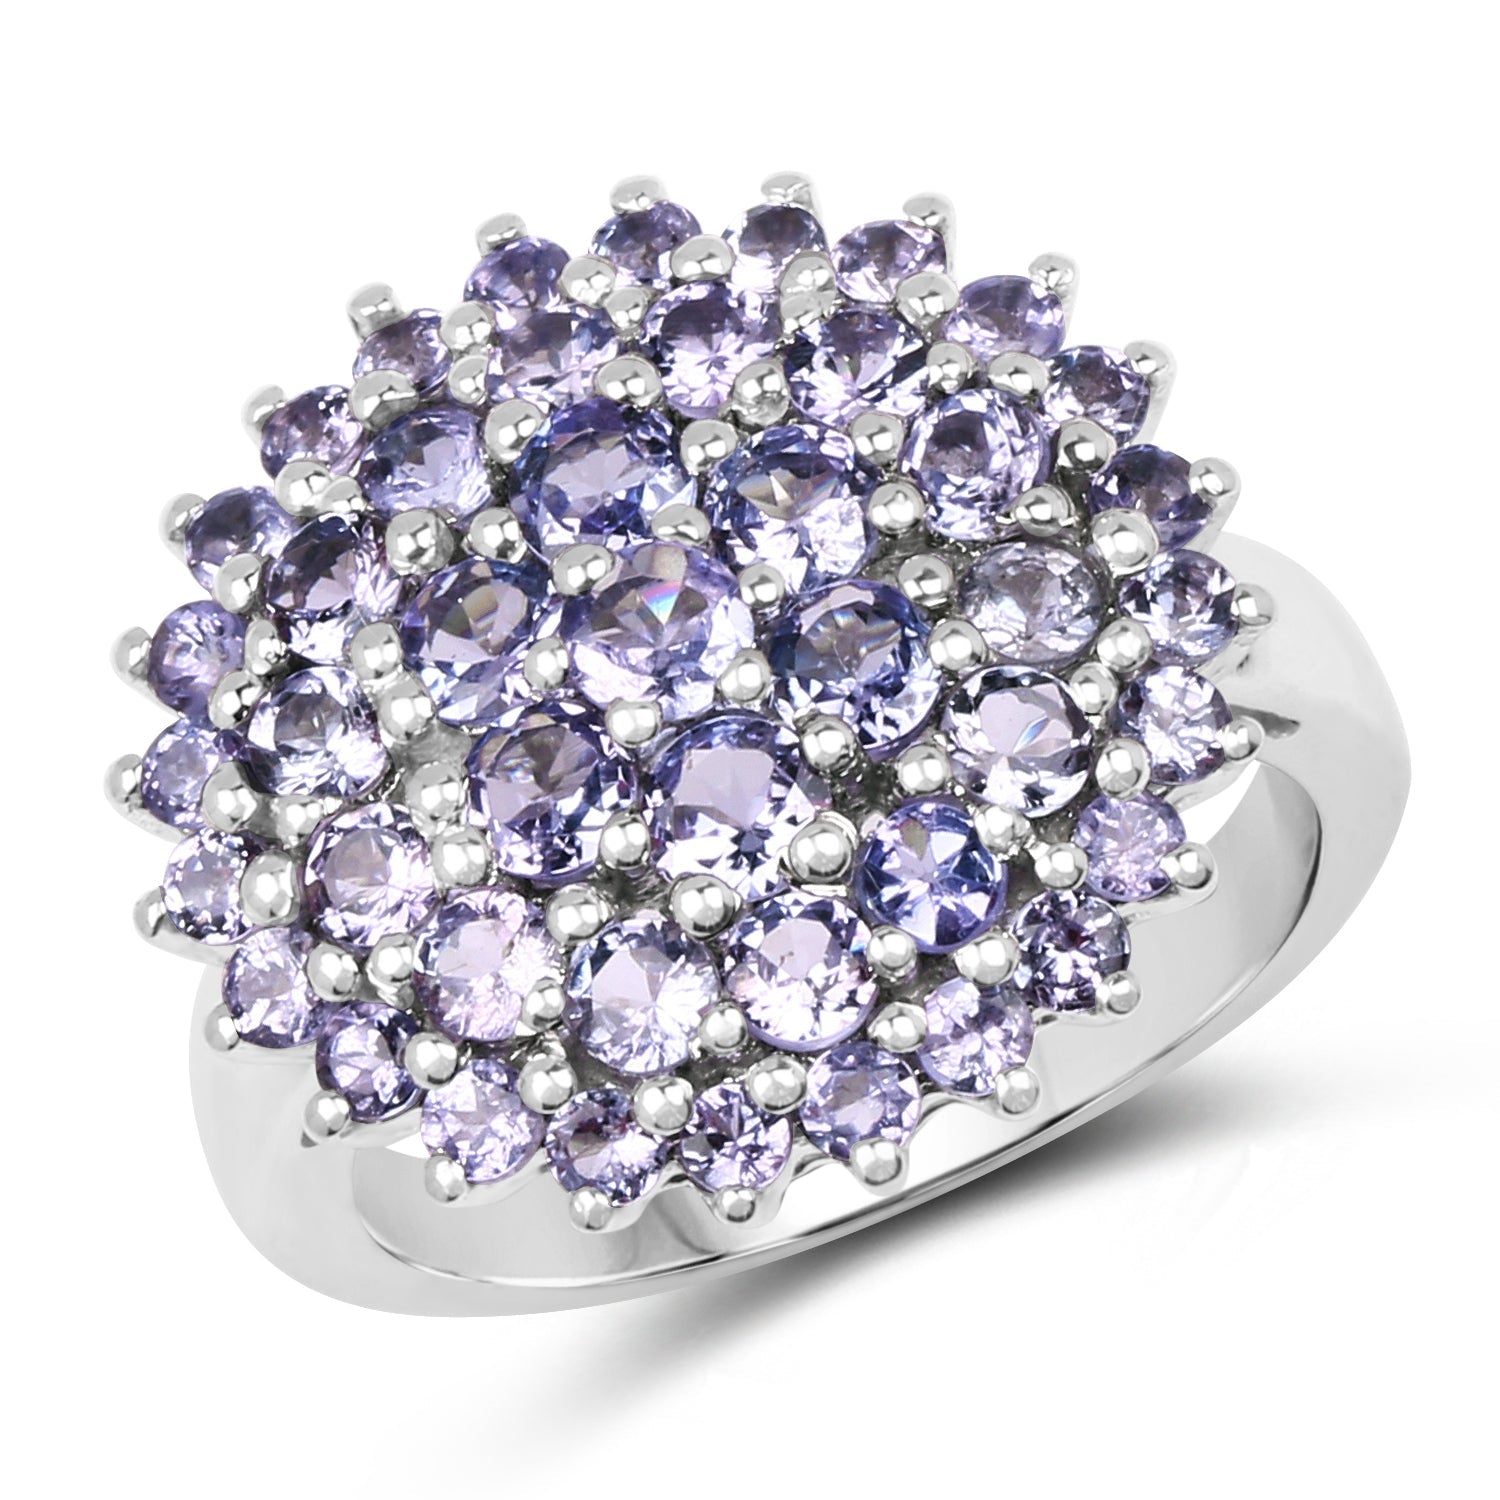 Genuine Tanzanite Cluster Ring in .925 Sterling Silver - 2.52 ctw Pear and Round Stones for Women, December Birthstone Bijou Her